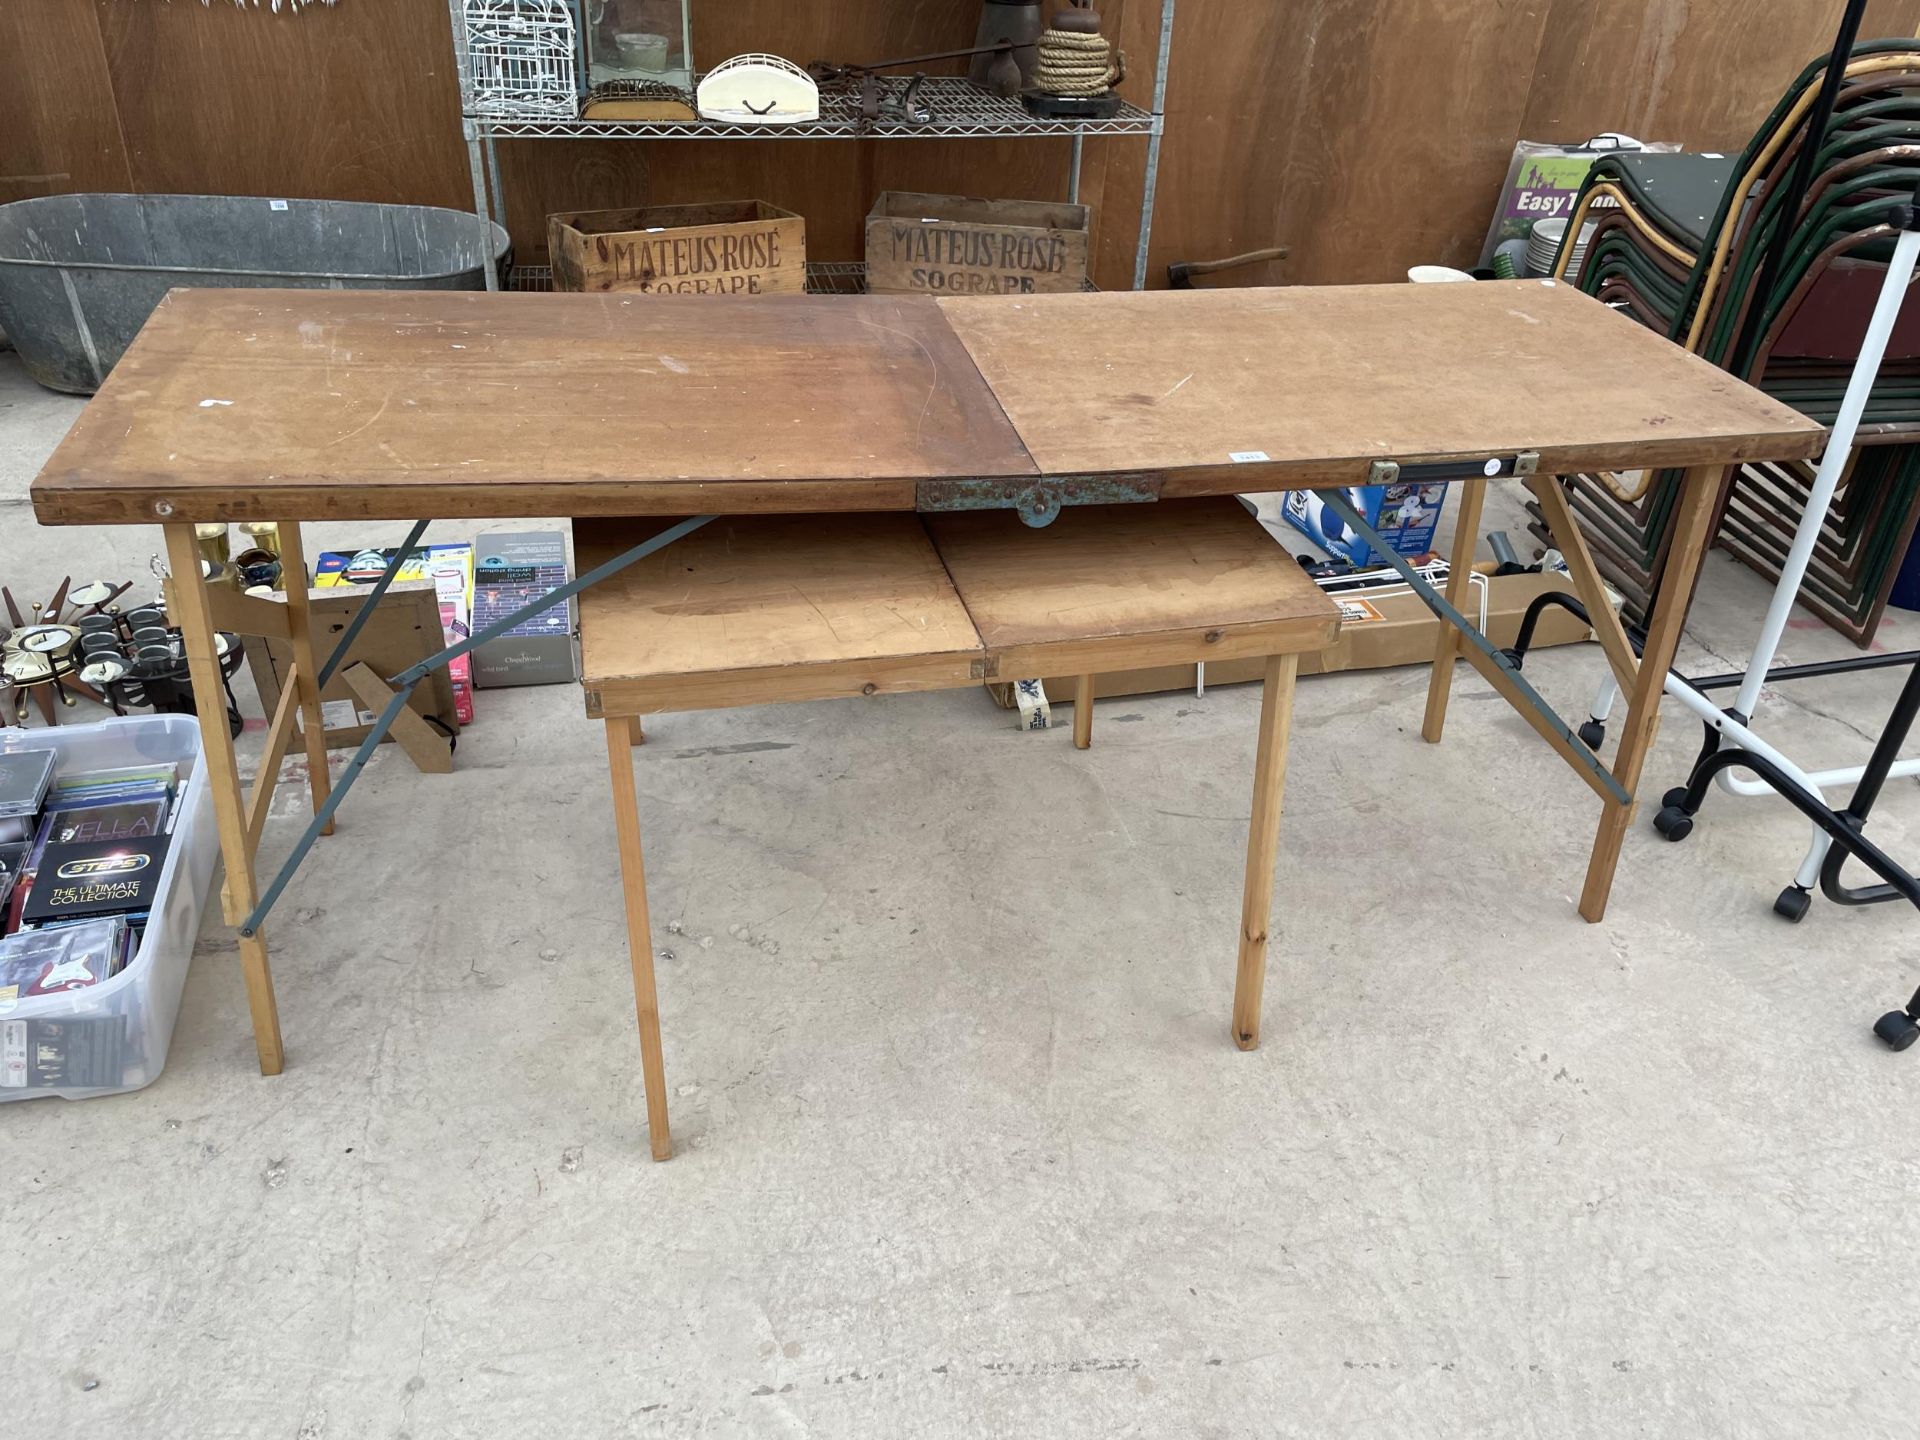 TWO FOLDING WOODEN PASTING TABLES